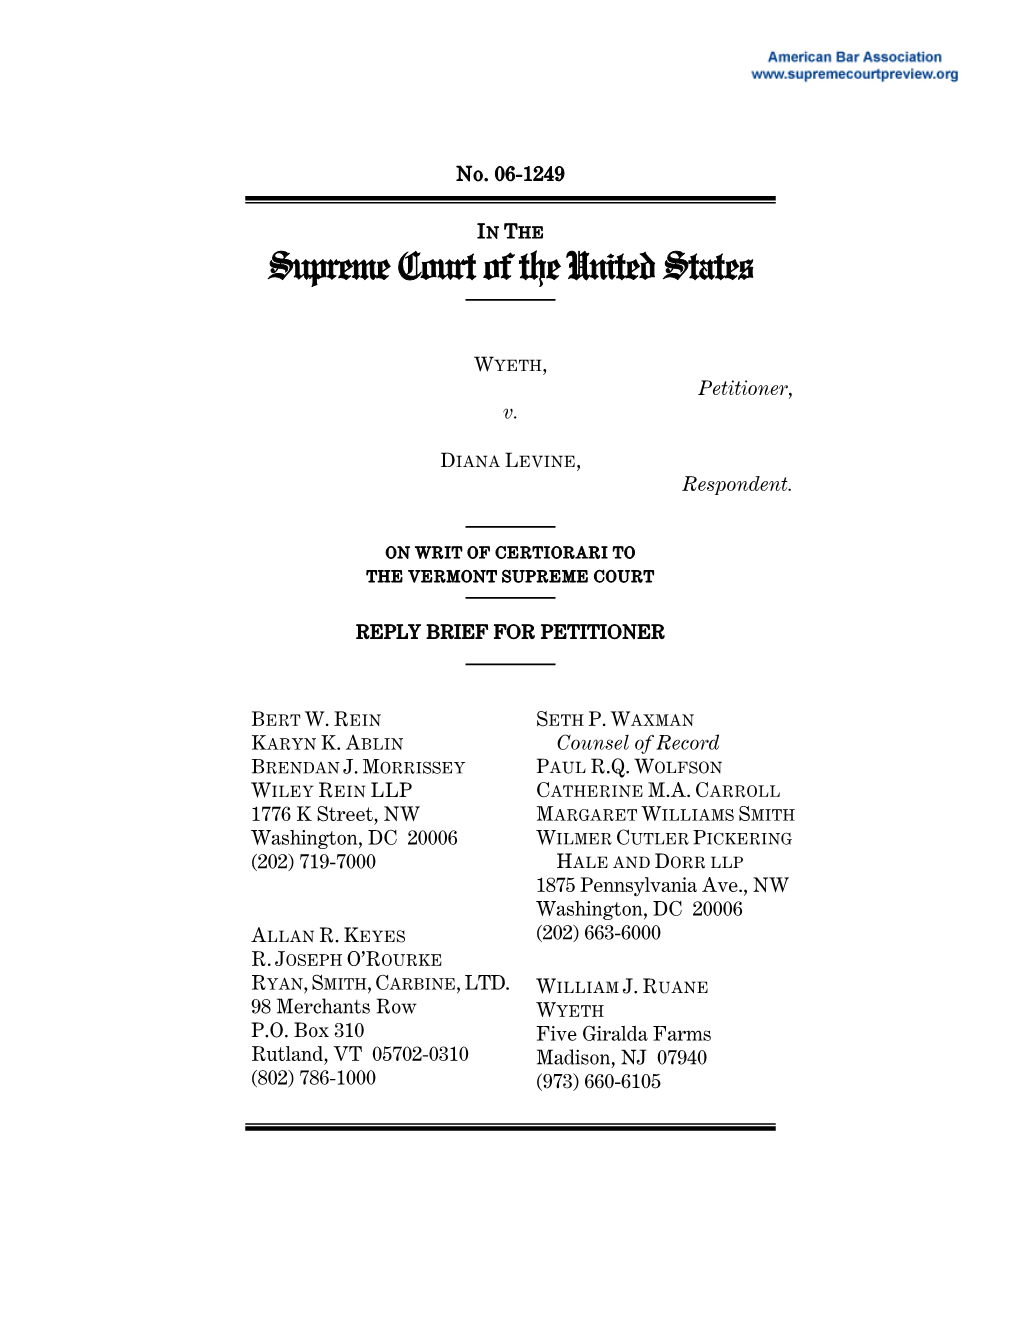 Reply Brief of Petitioner for Wyeth V. Levine, 06-1249